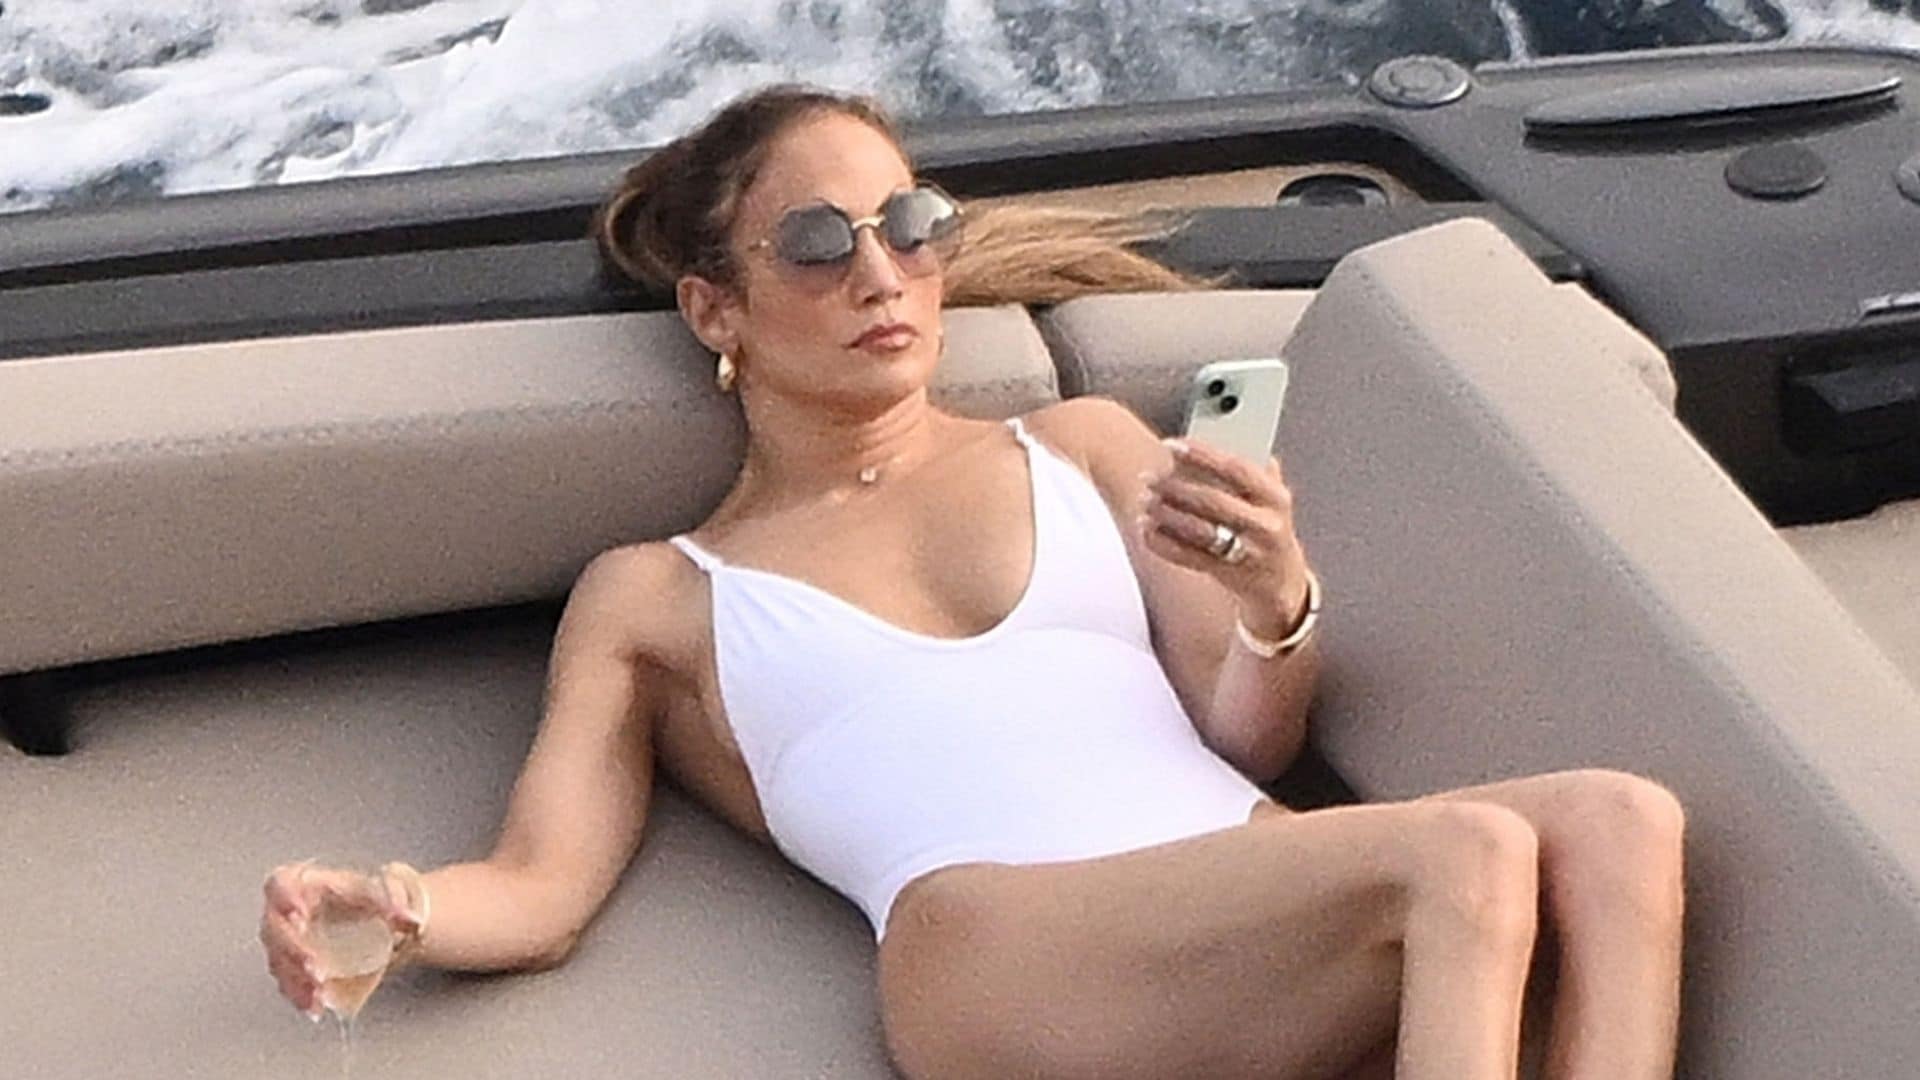 Jennifer Lopez is all smiles in white swimsuit while vacationing in Italy